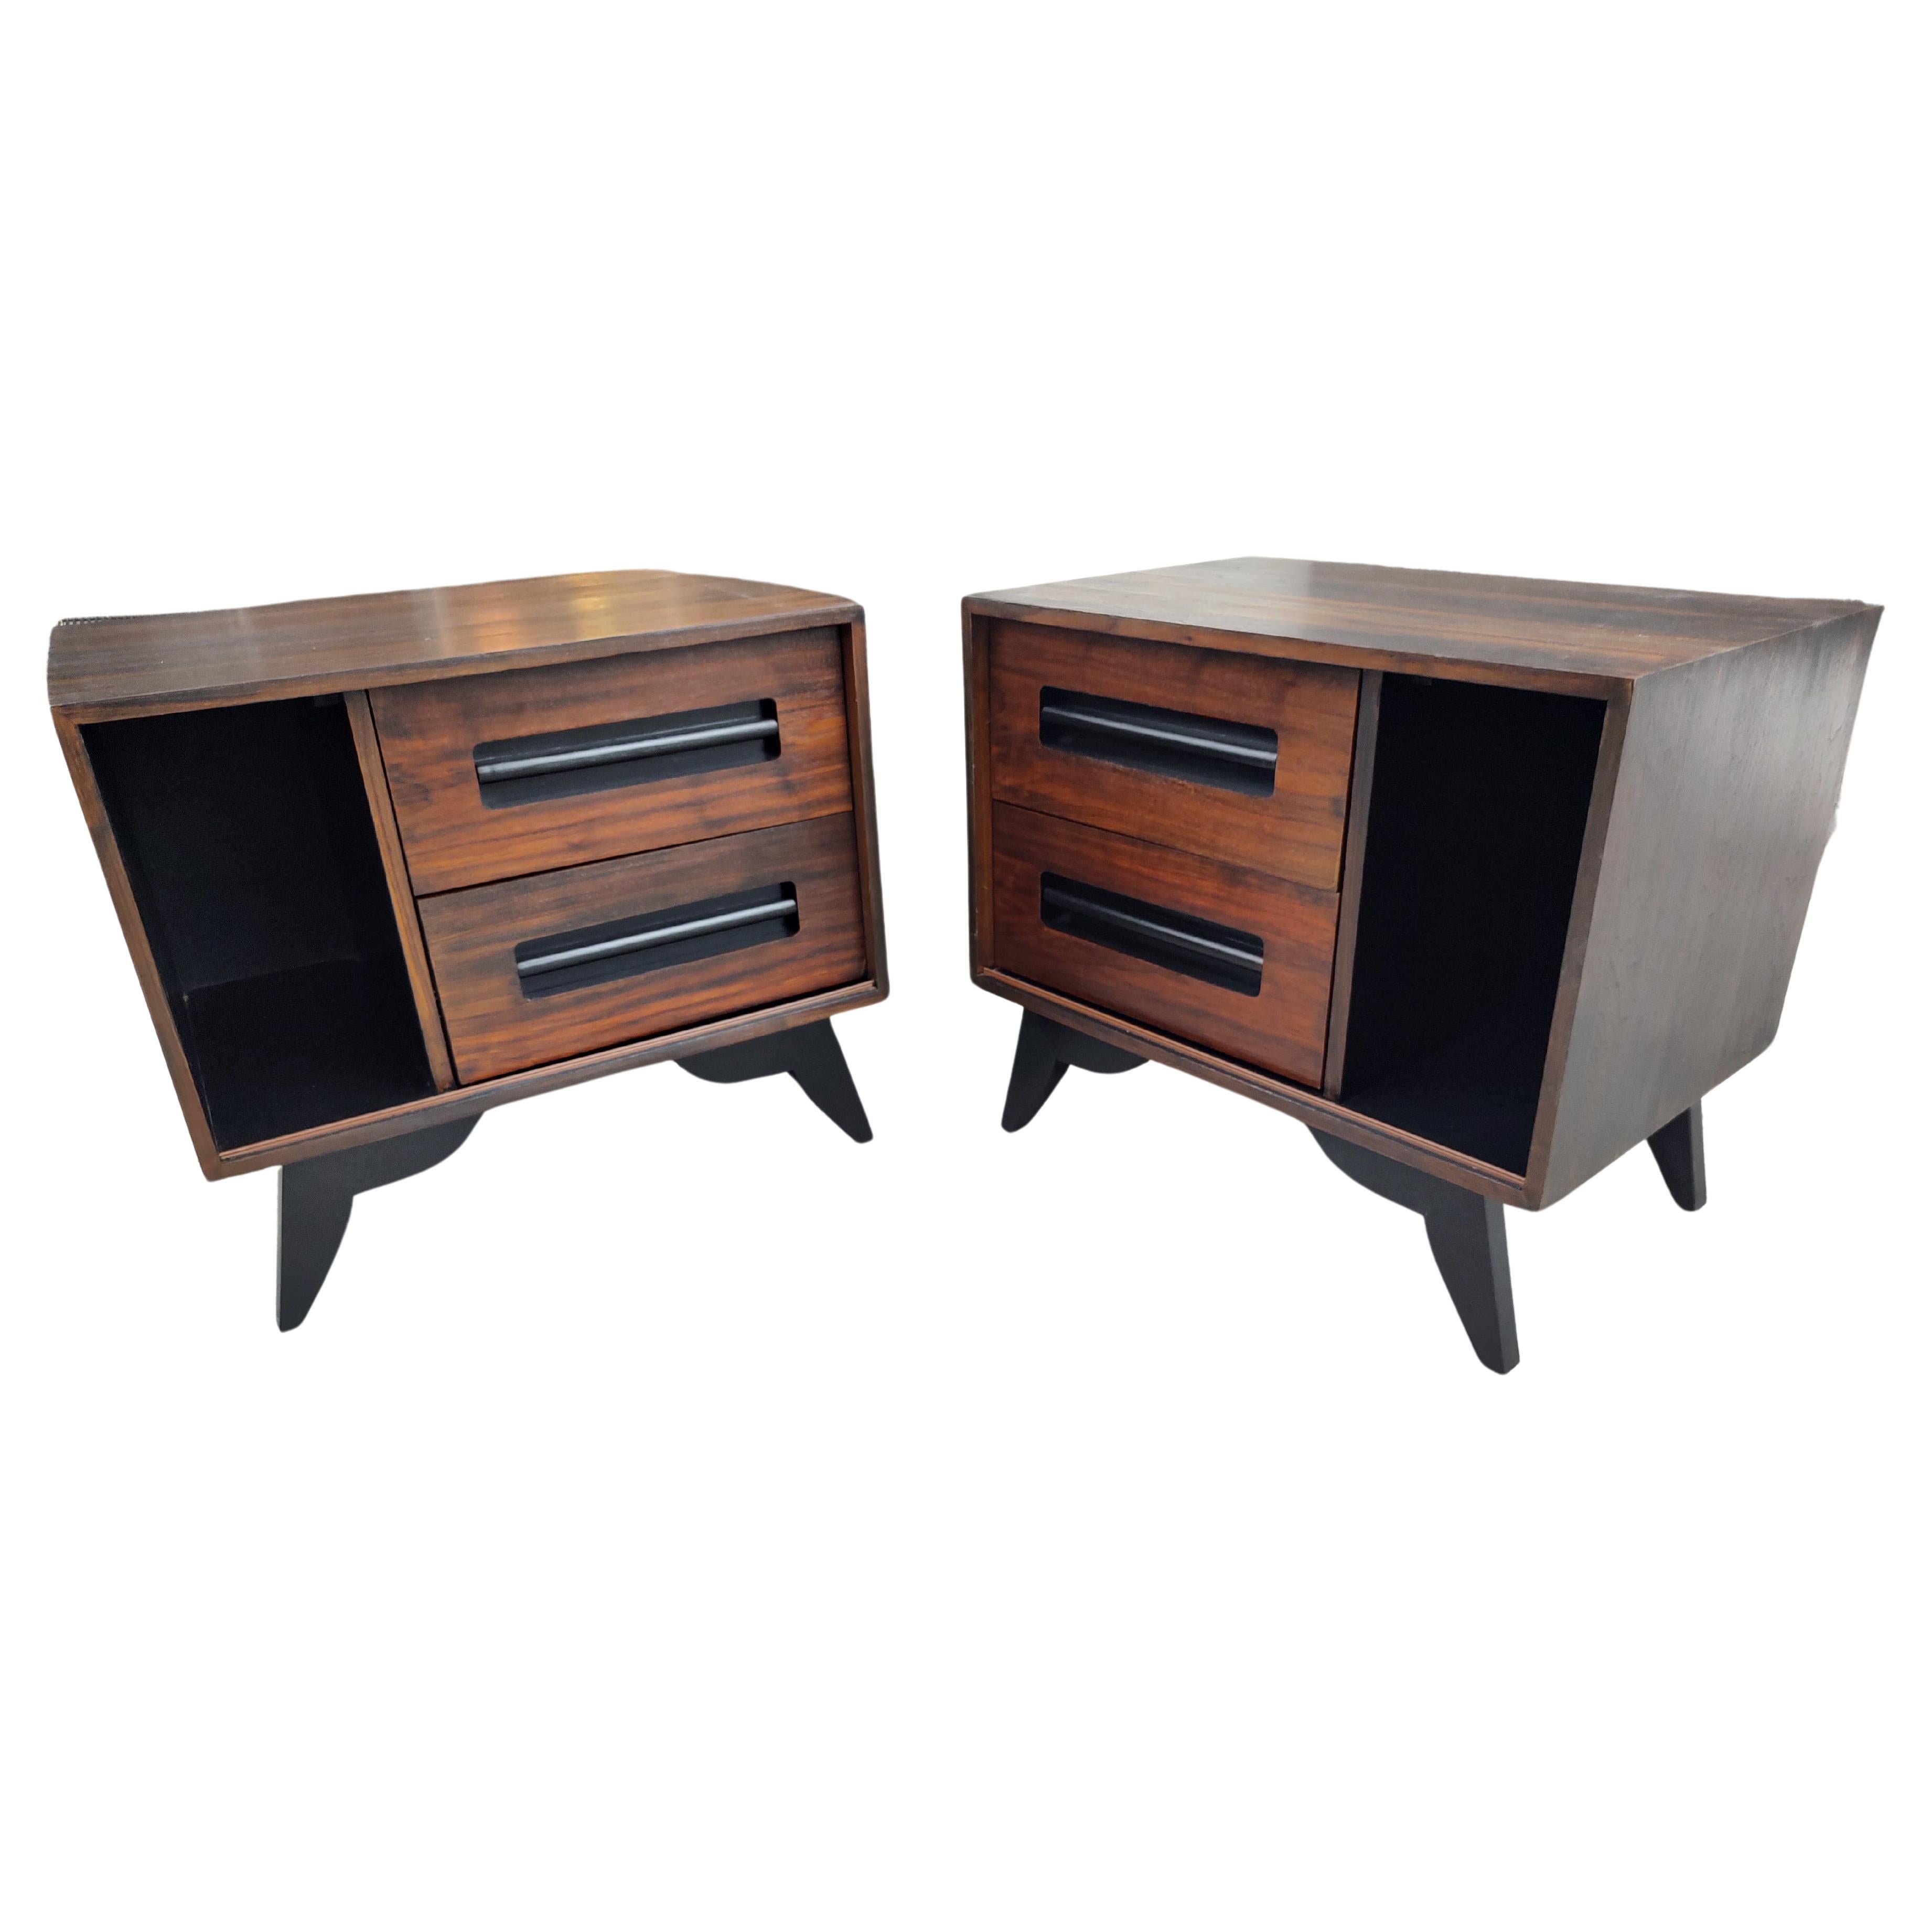 Pair of Mid-Century Modern Danish Rosewood & Black Lacquer Nightstands C1970 For Sale 1